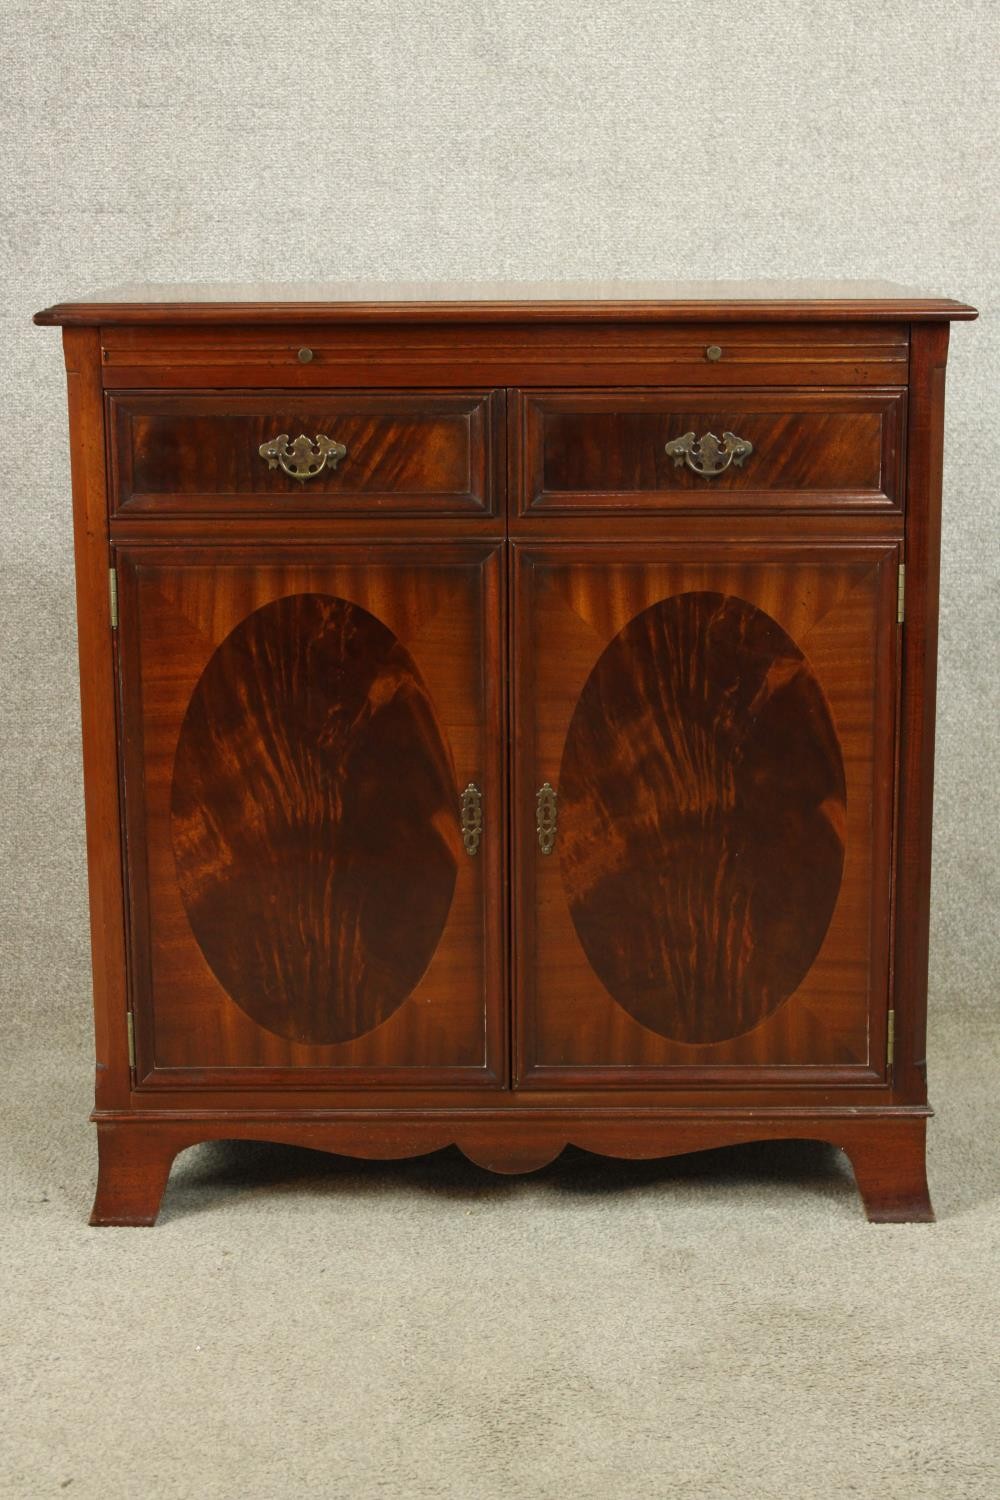 A contemporary Regency style twin door entertainment cabinet complete with with turntable, amp,